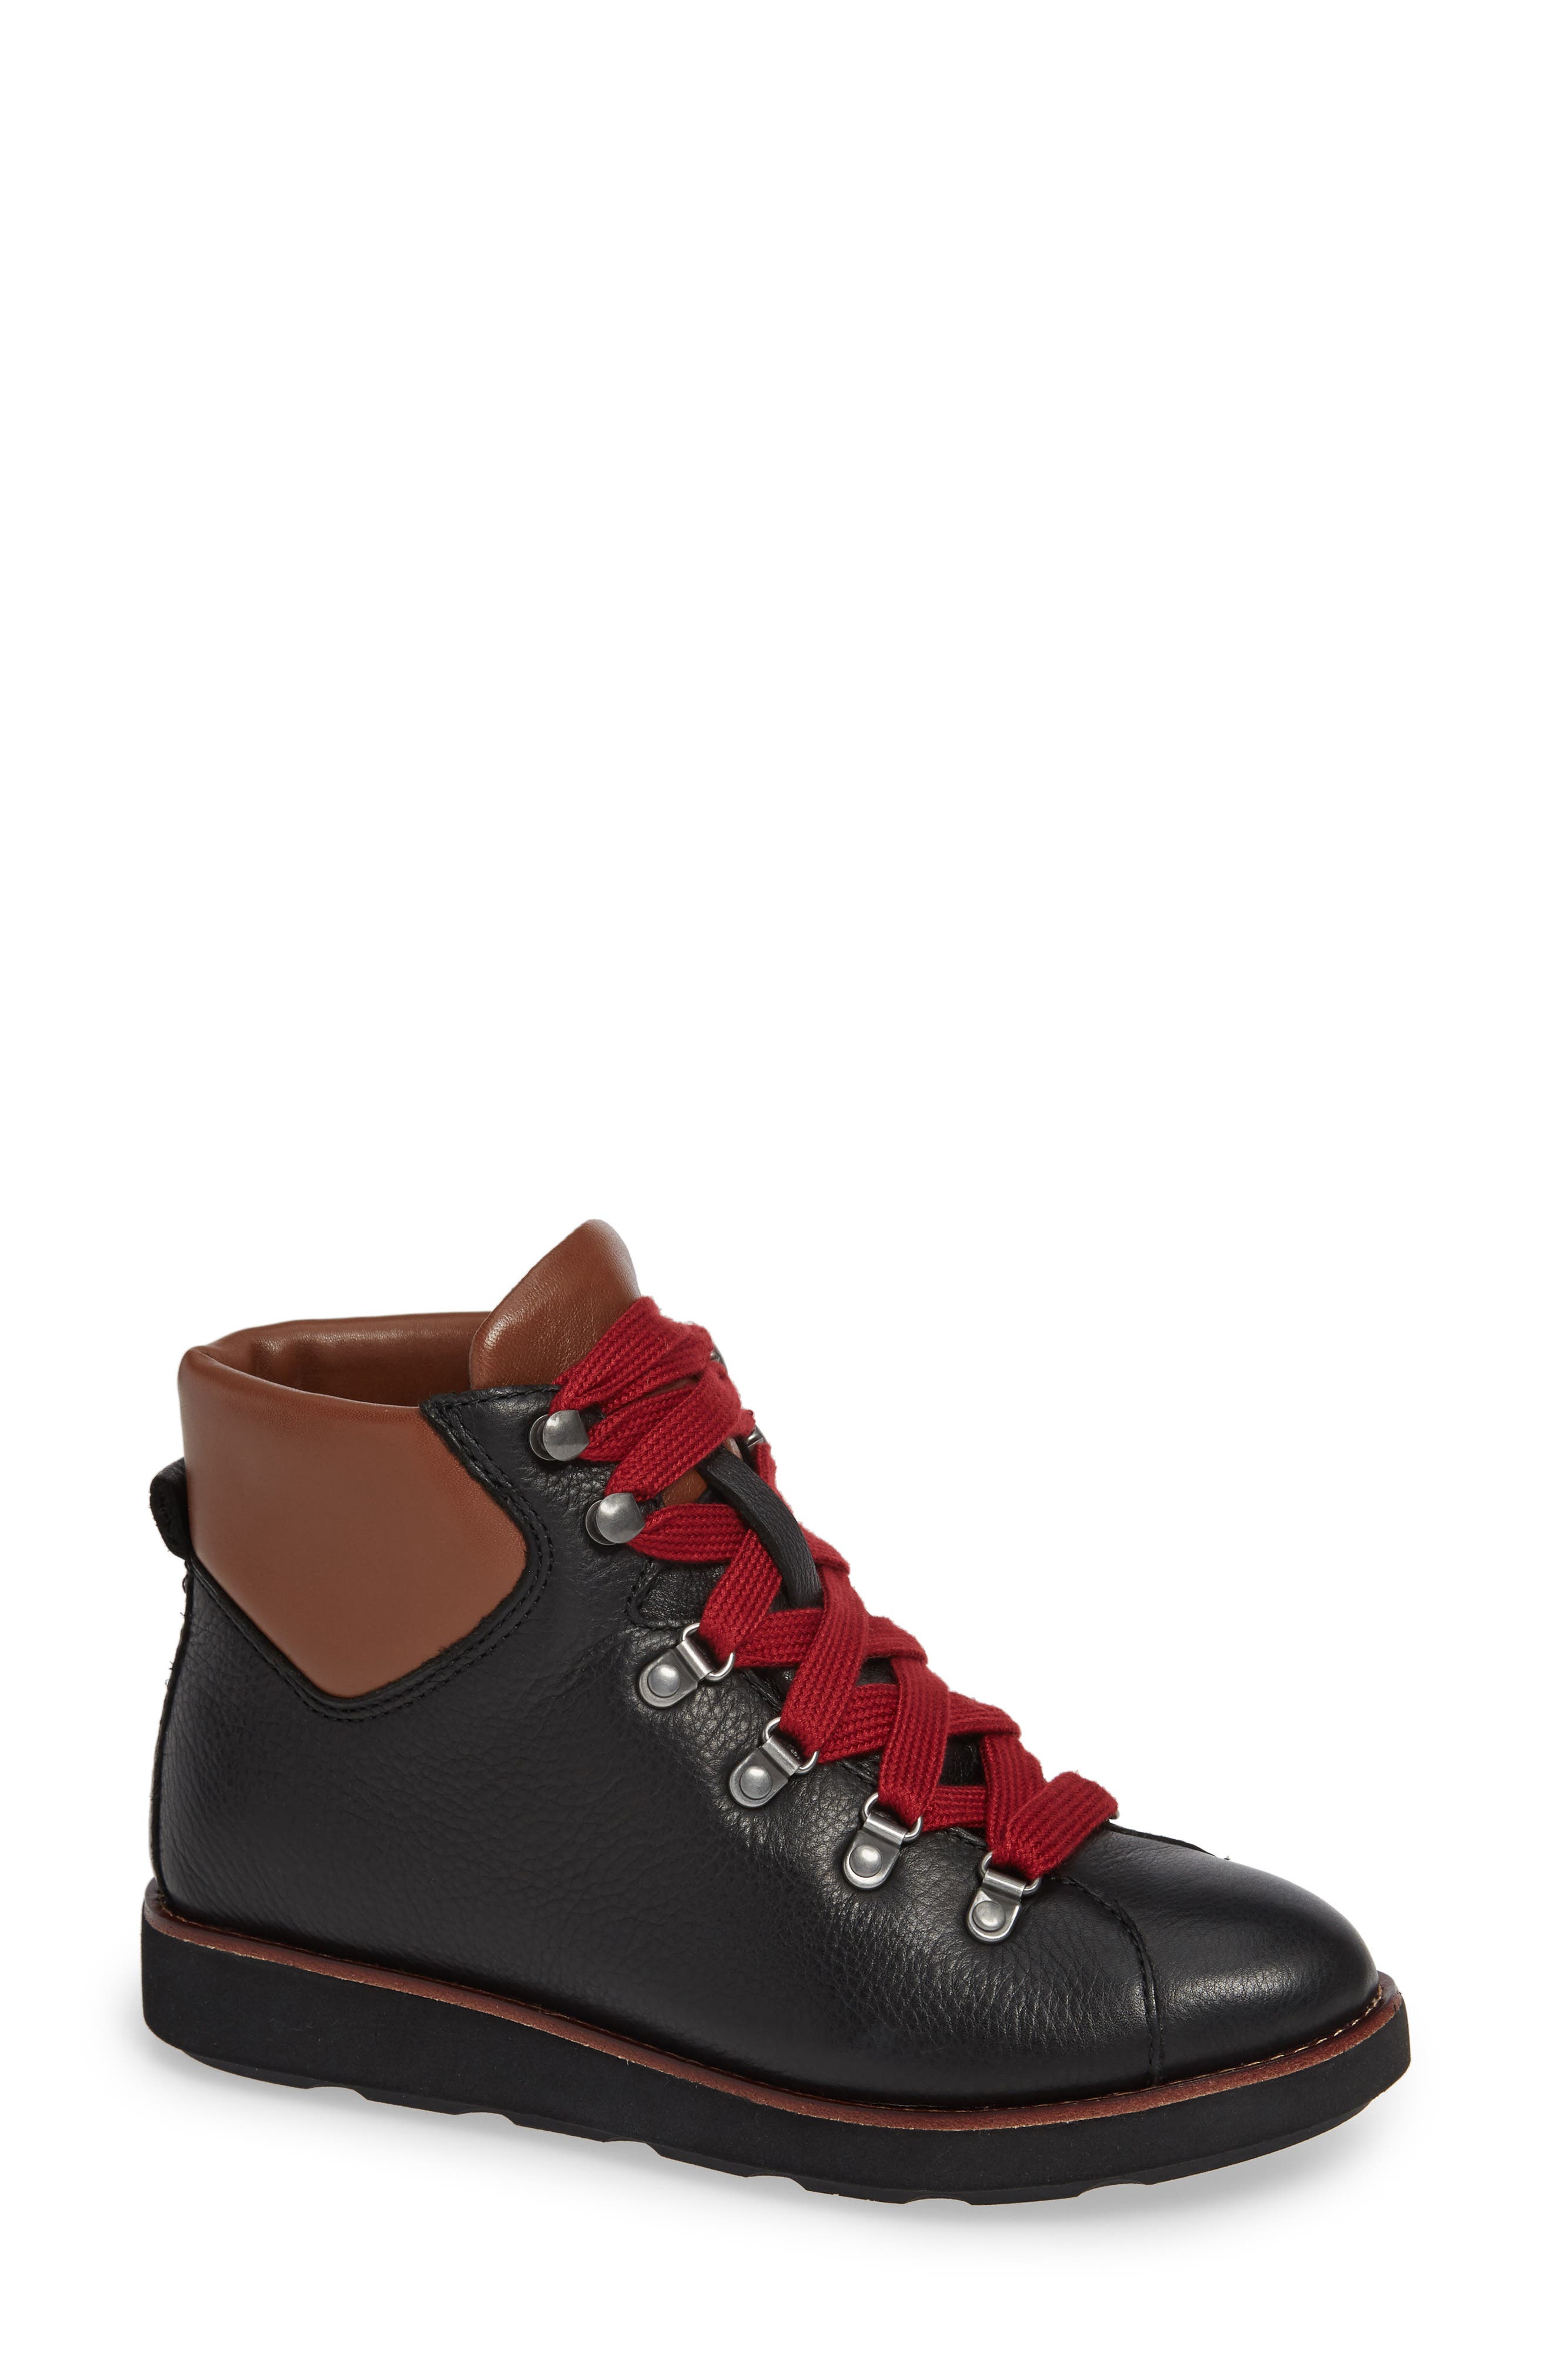 bionica leather lace up boots